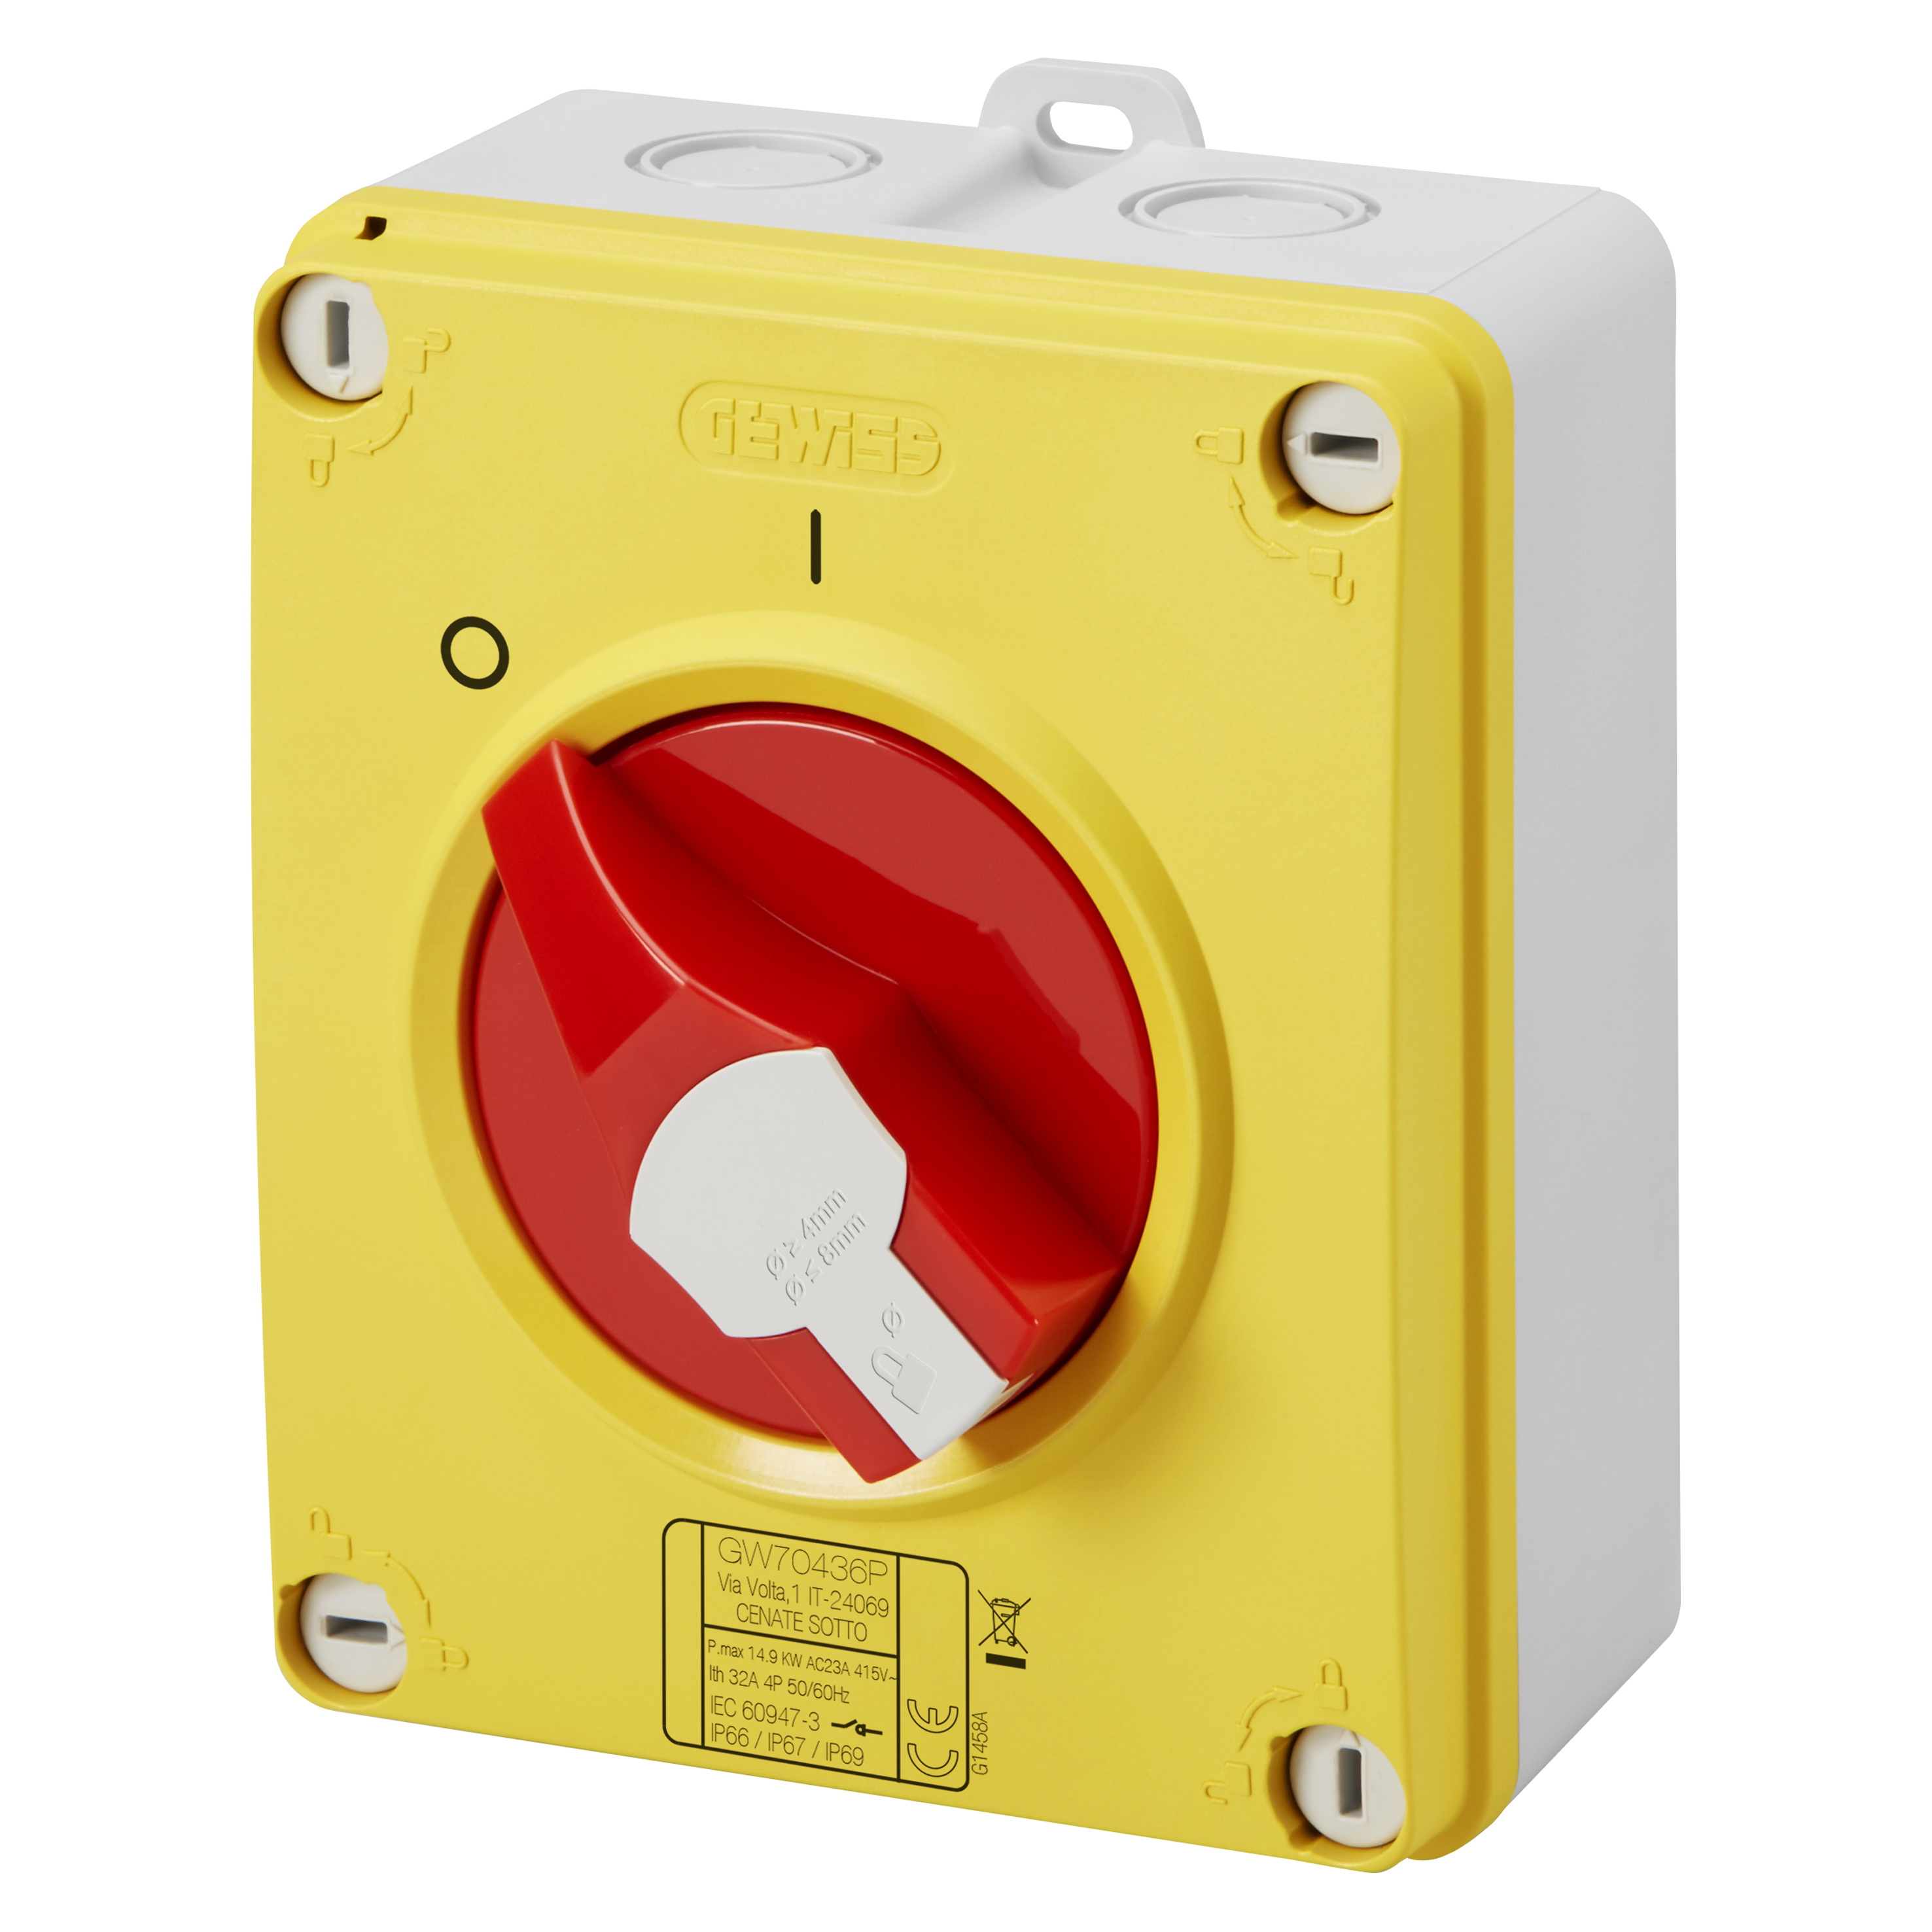 GW70441P Isolator - HP - Emergency - Isolating Material Box - 40A 2P - Lockable Red Knob - IP66/67/69